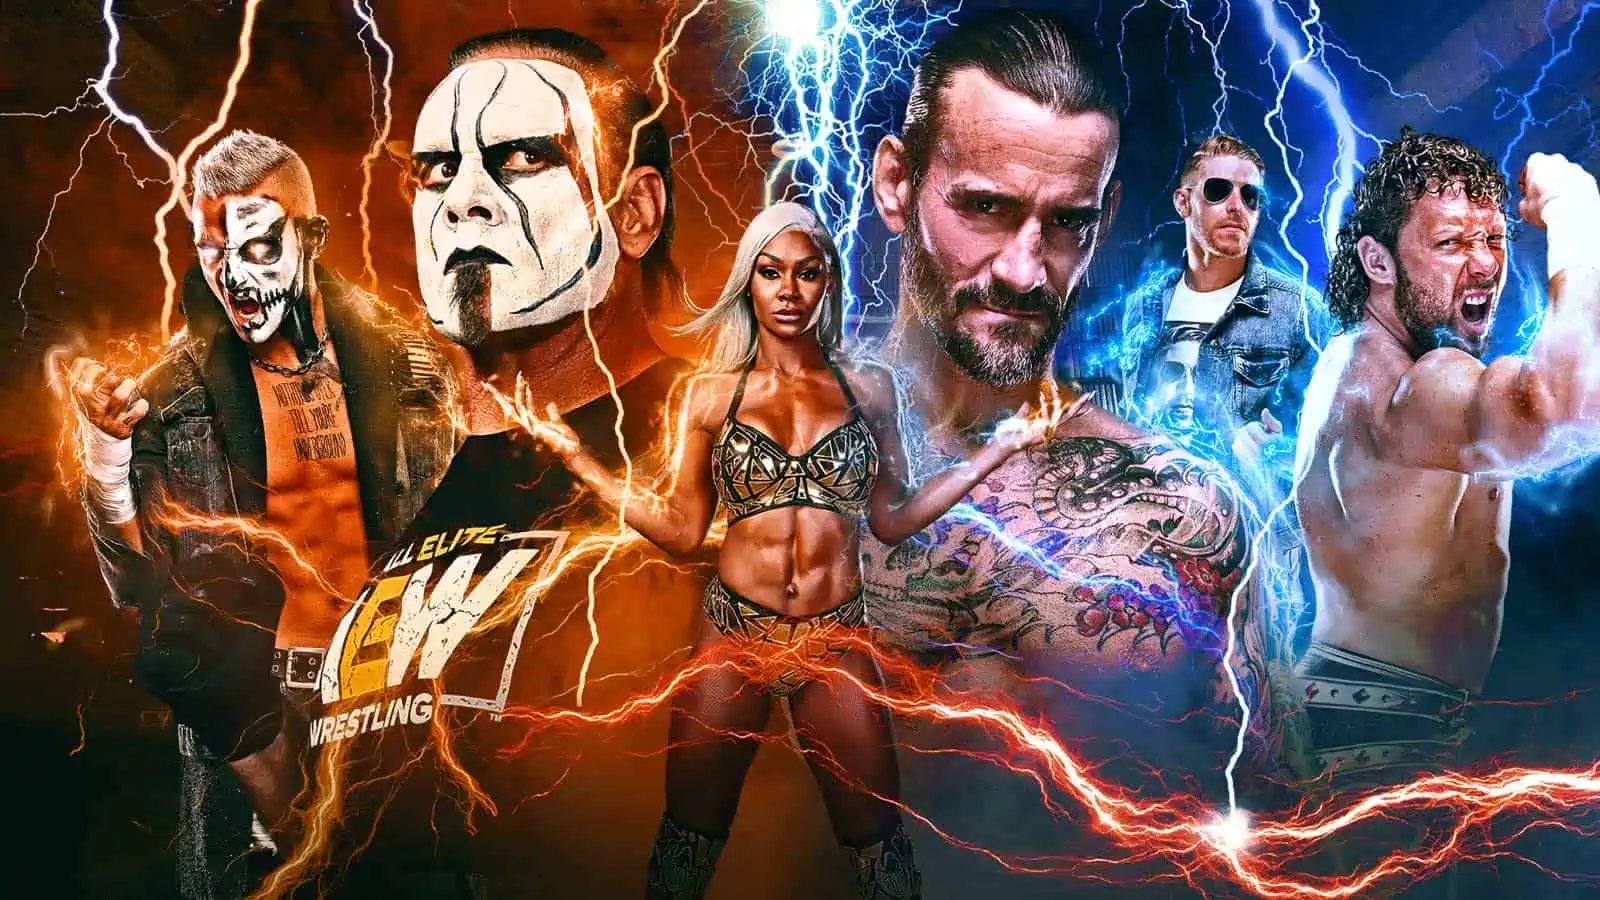 Where Can You Watch “AEW Rampage?”